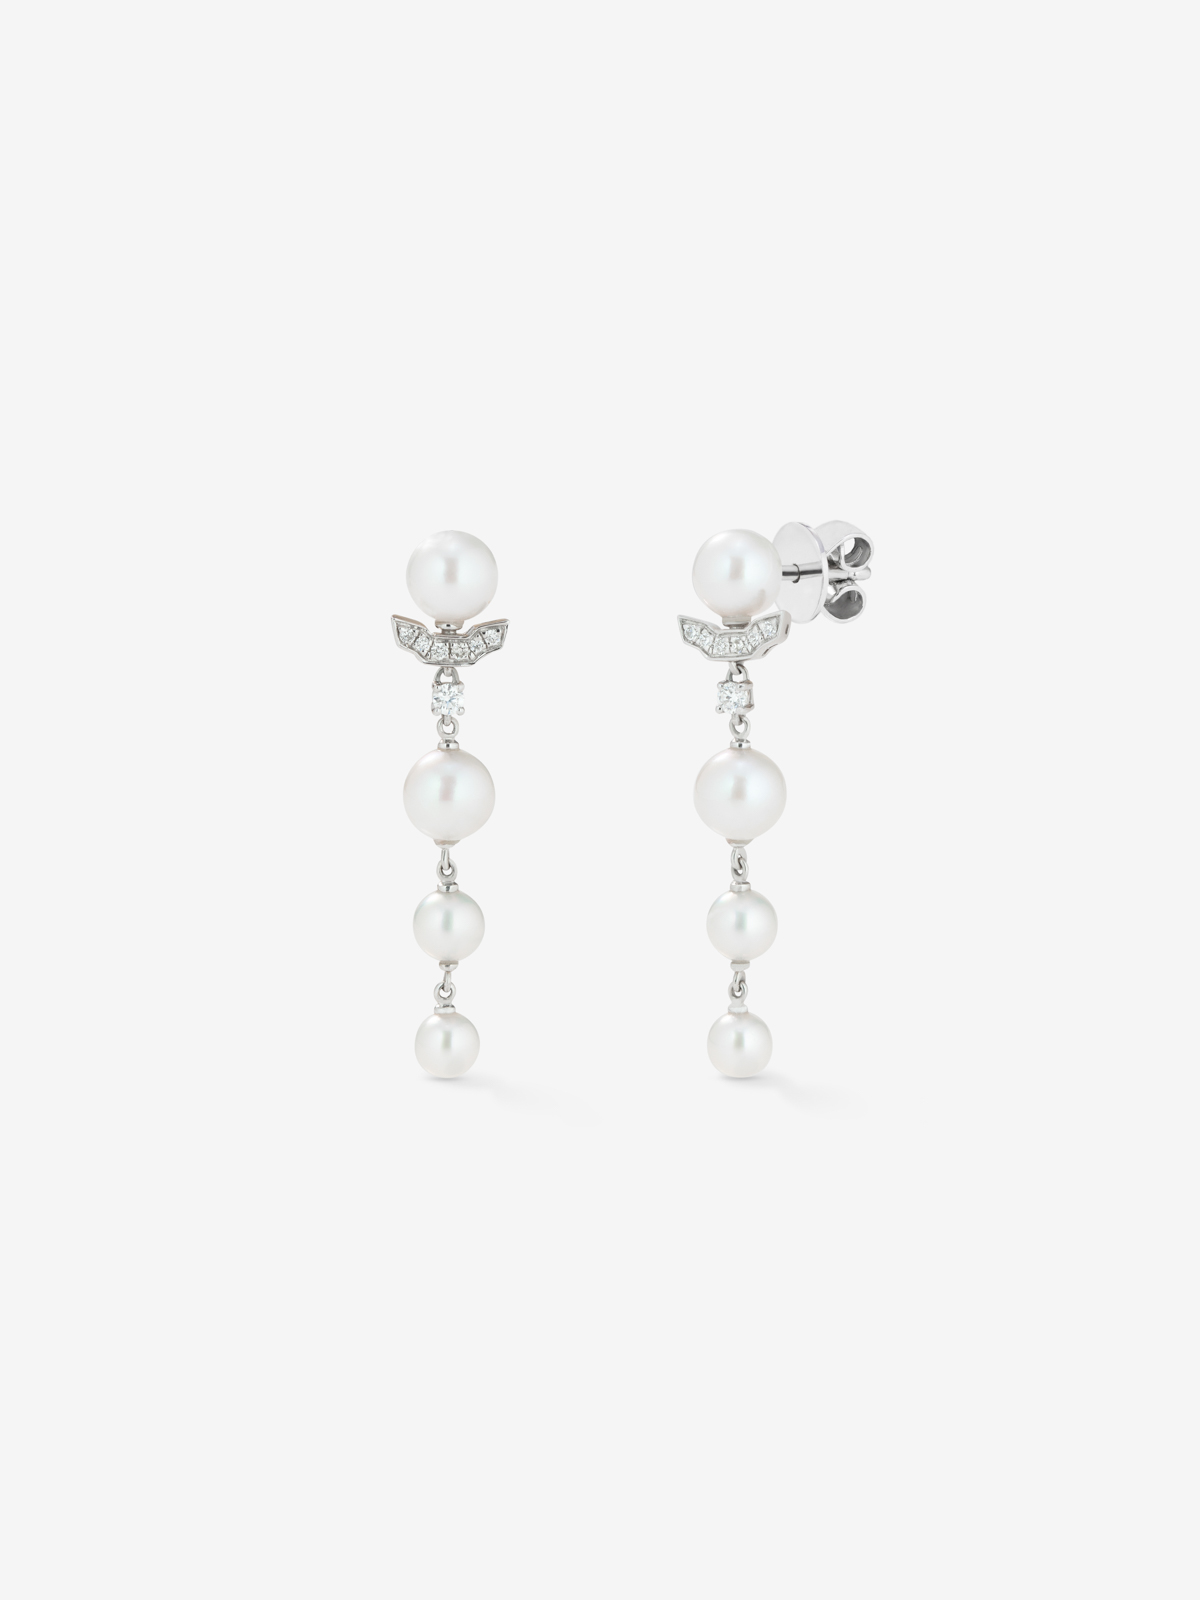 18k white gold long earrings with Akoya pearls and diamonds